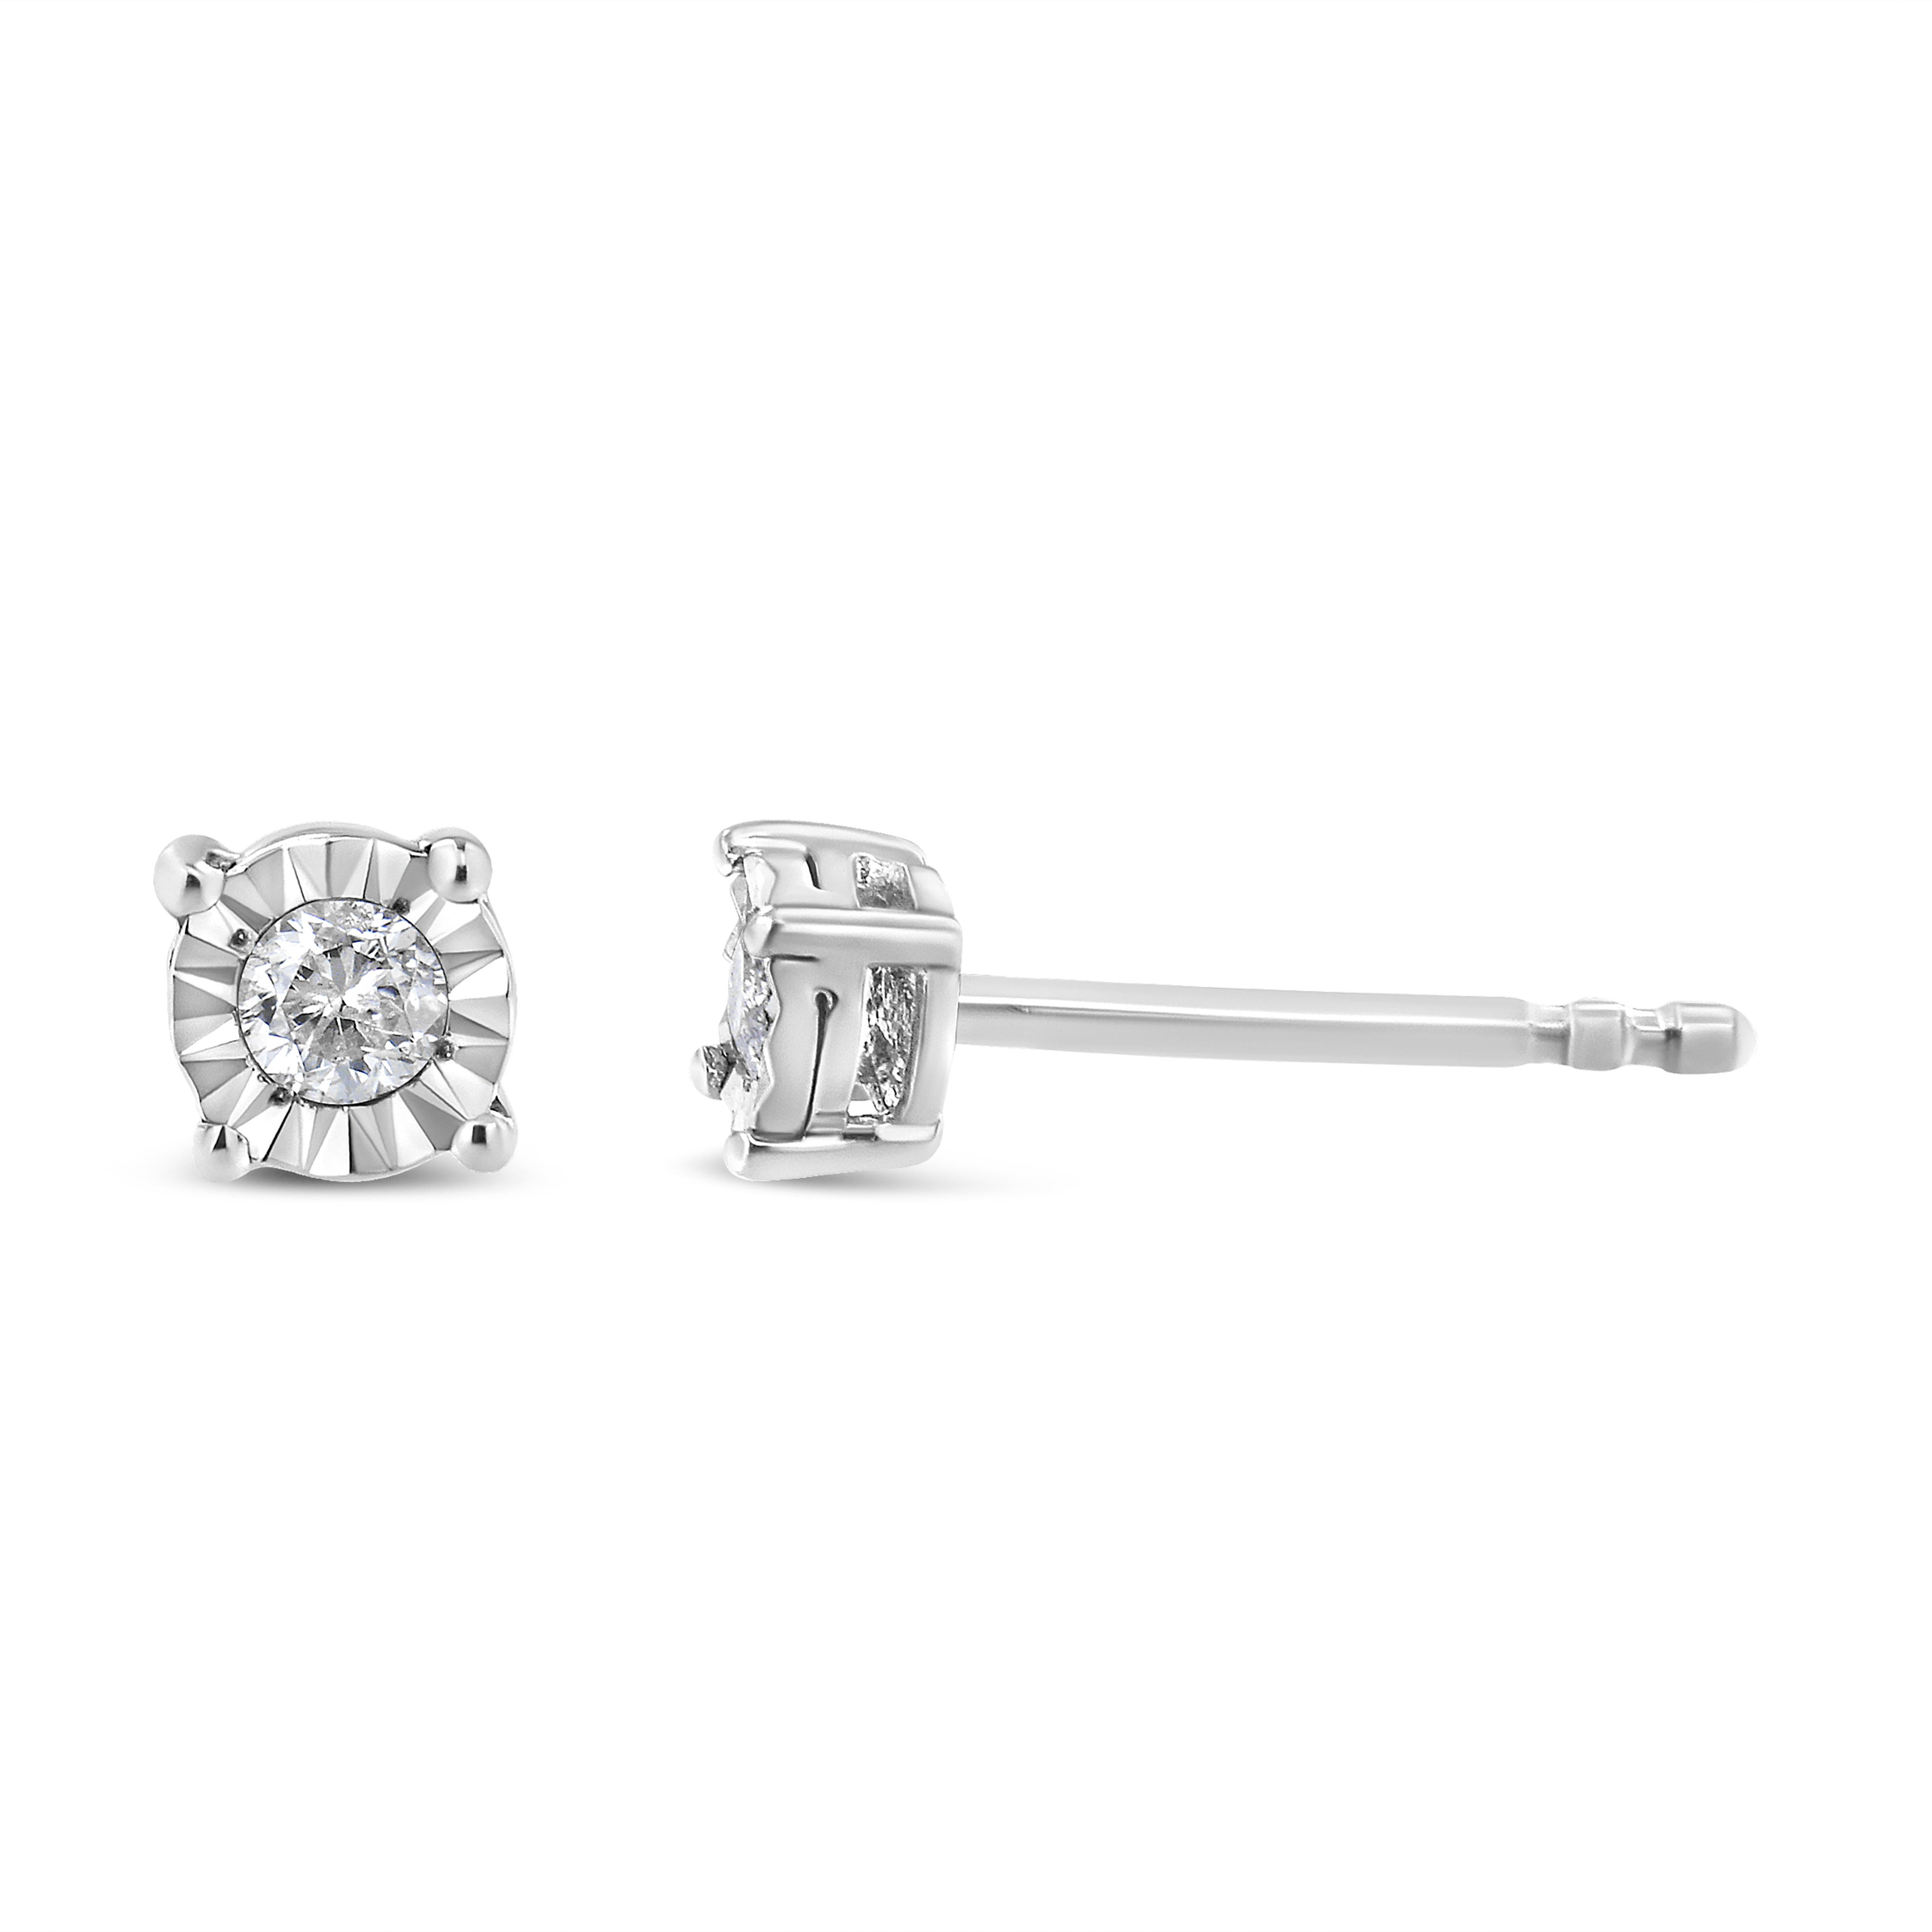 Add a shimmering touch to your wardrobe with these elegant and extravagant diamond earrings. Fashioned in the round shape, the earrings are crafted of sterling silver. Each of the studs captivates sparkling round cut diamonds, which gives the